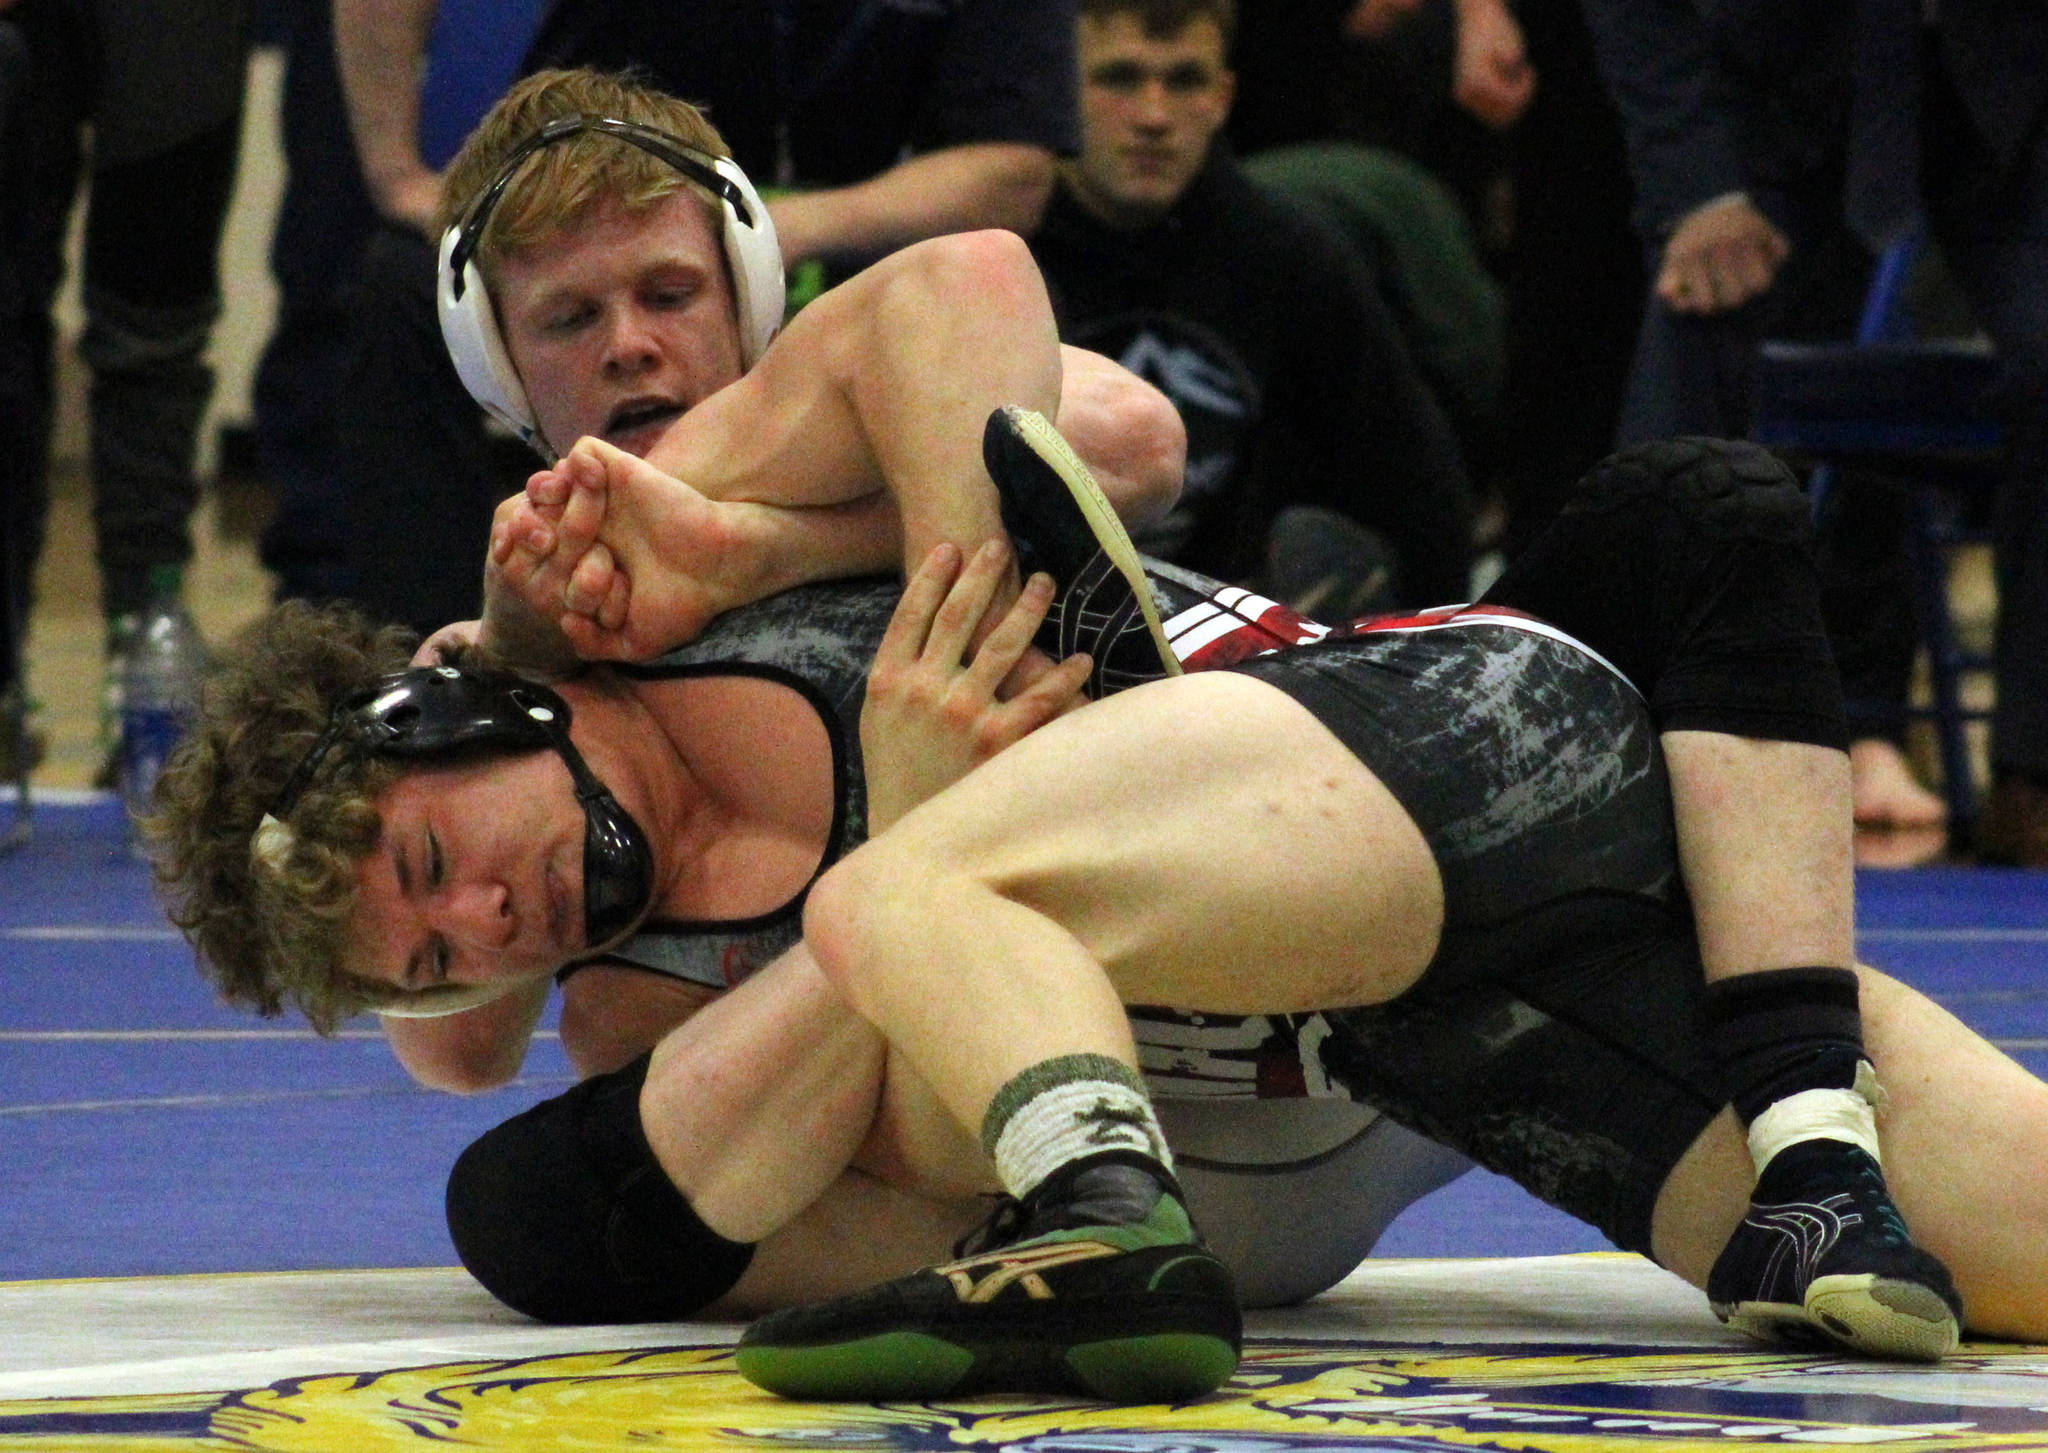 Soldotna’s Sean Babitt wrestles to a Division I state title at 189 pounds against Wasilla’s Colton Lindquist on Saturday, May 22, 2021, at Bartlett High School in Anchorage, Alaska. (Photo by Tim Rockey/Frontiersman)